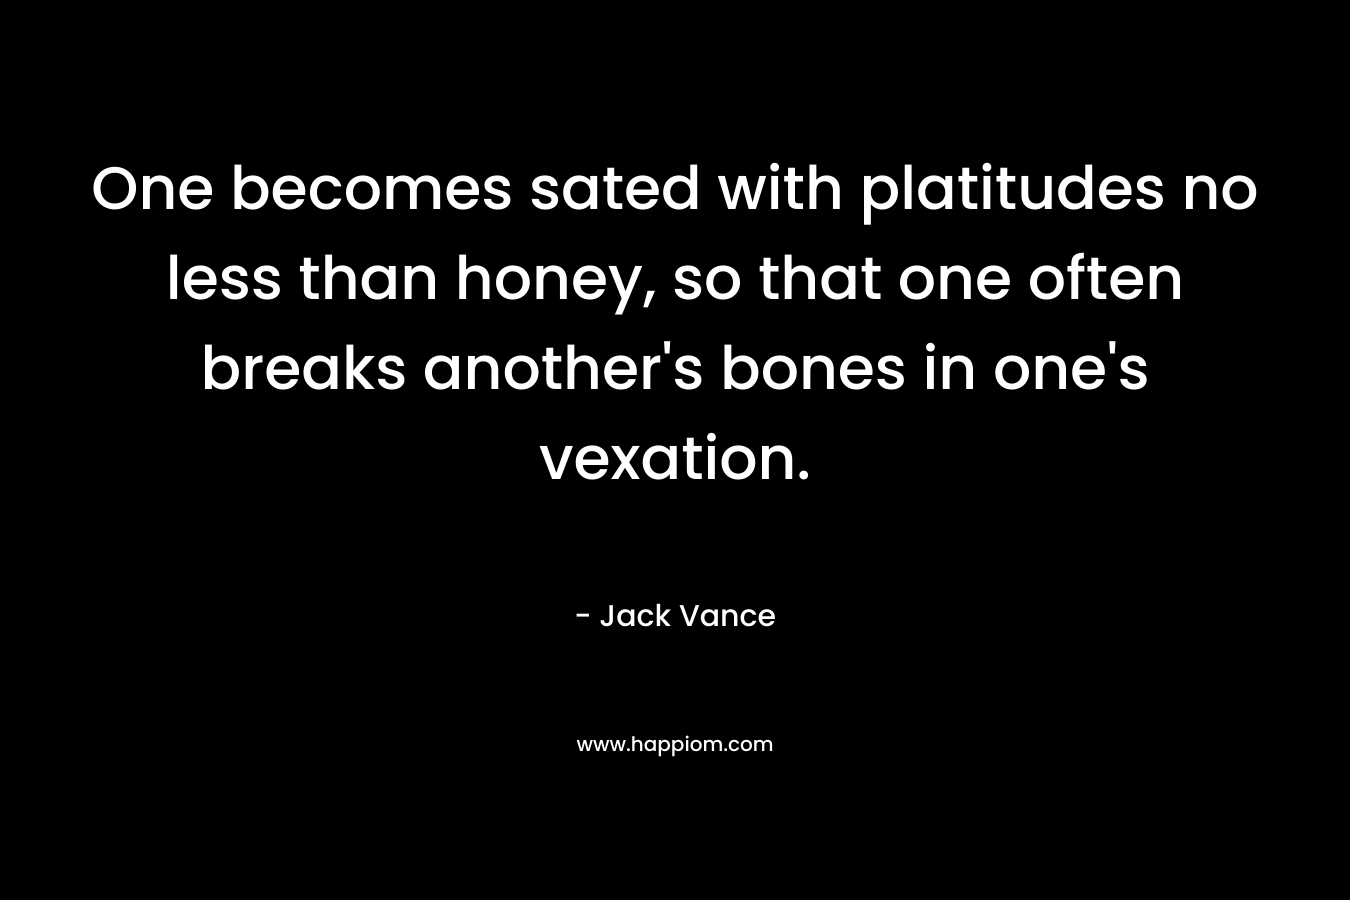 One becomes sated with platitudes no less than honey, so that one often breaks another’s bones in one’s vexation. – Jack Vance